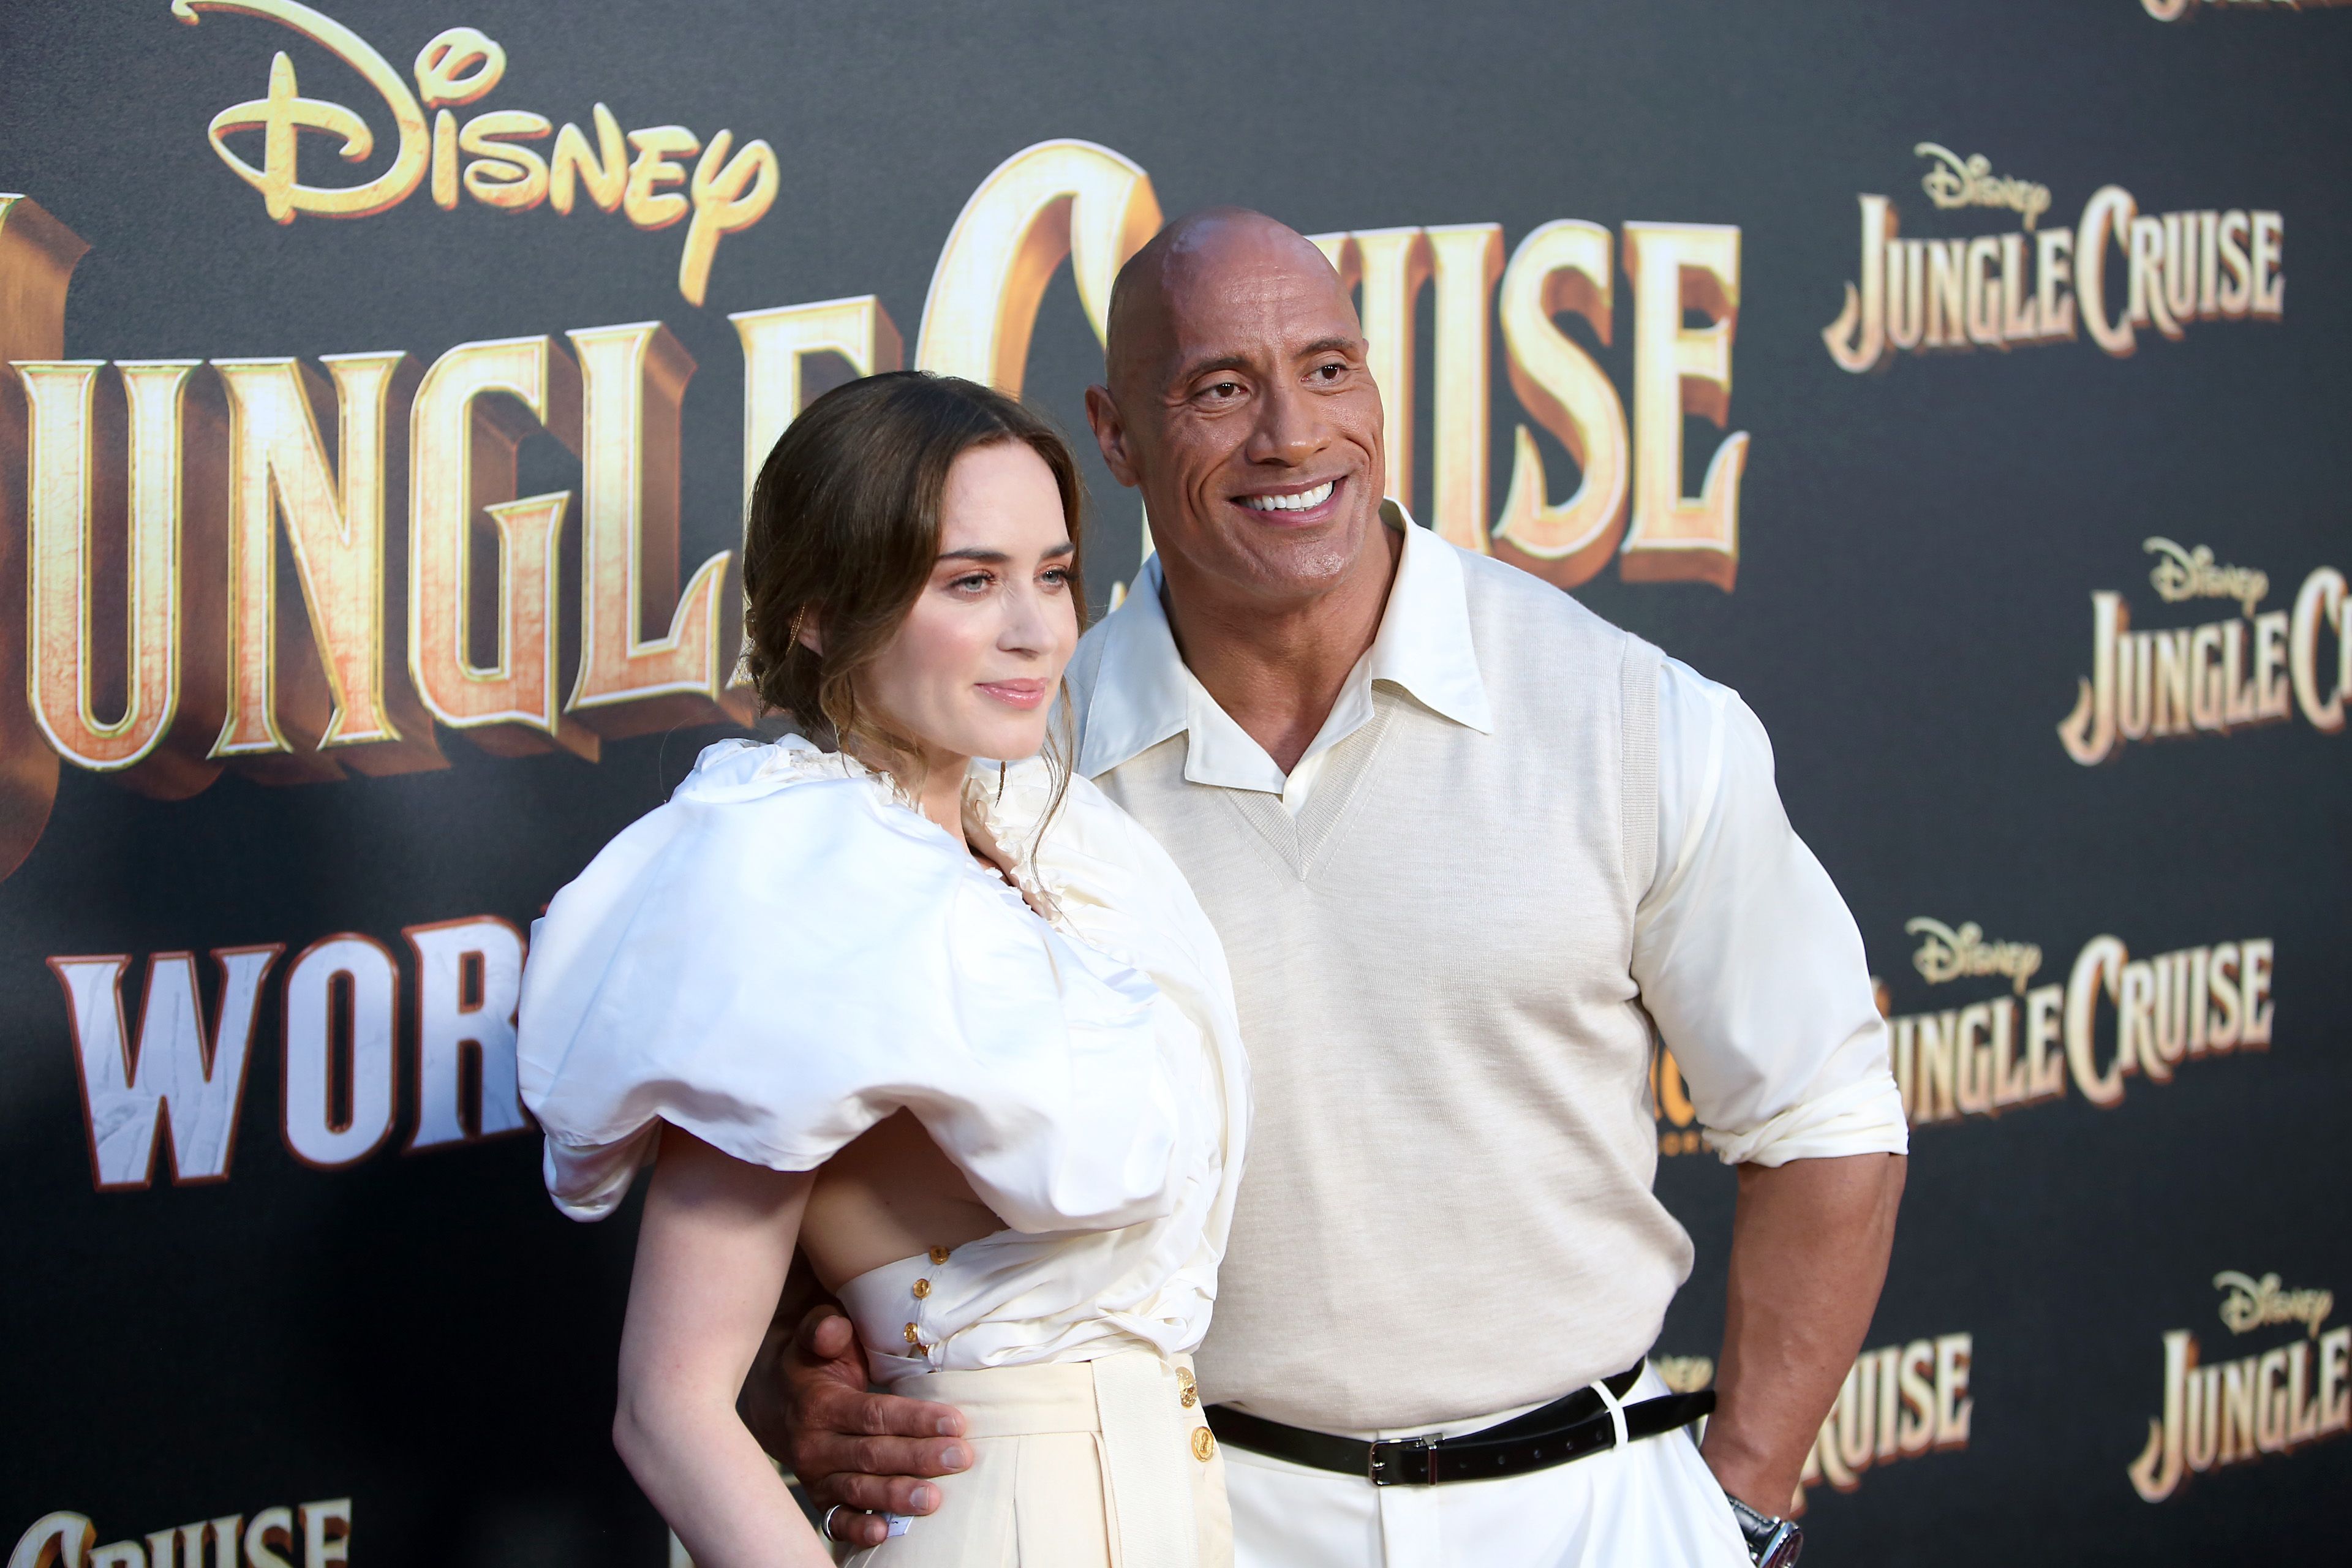 Why is Disney’s ‘Jungle Cruise’ Getting an Early Digital Release?